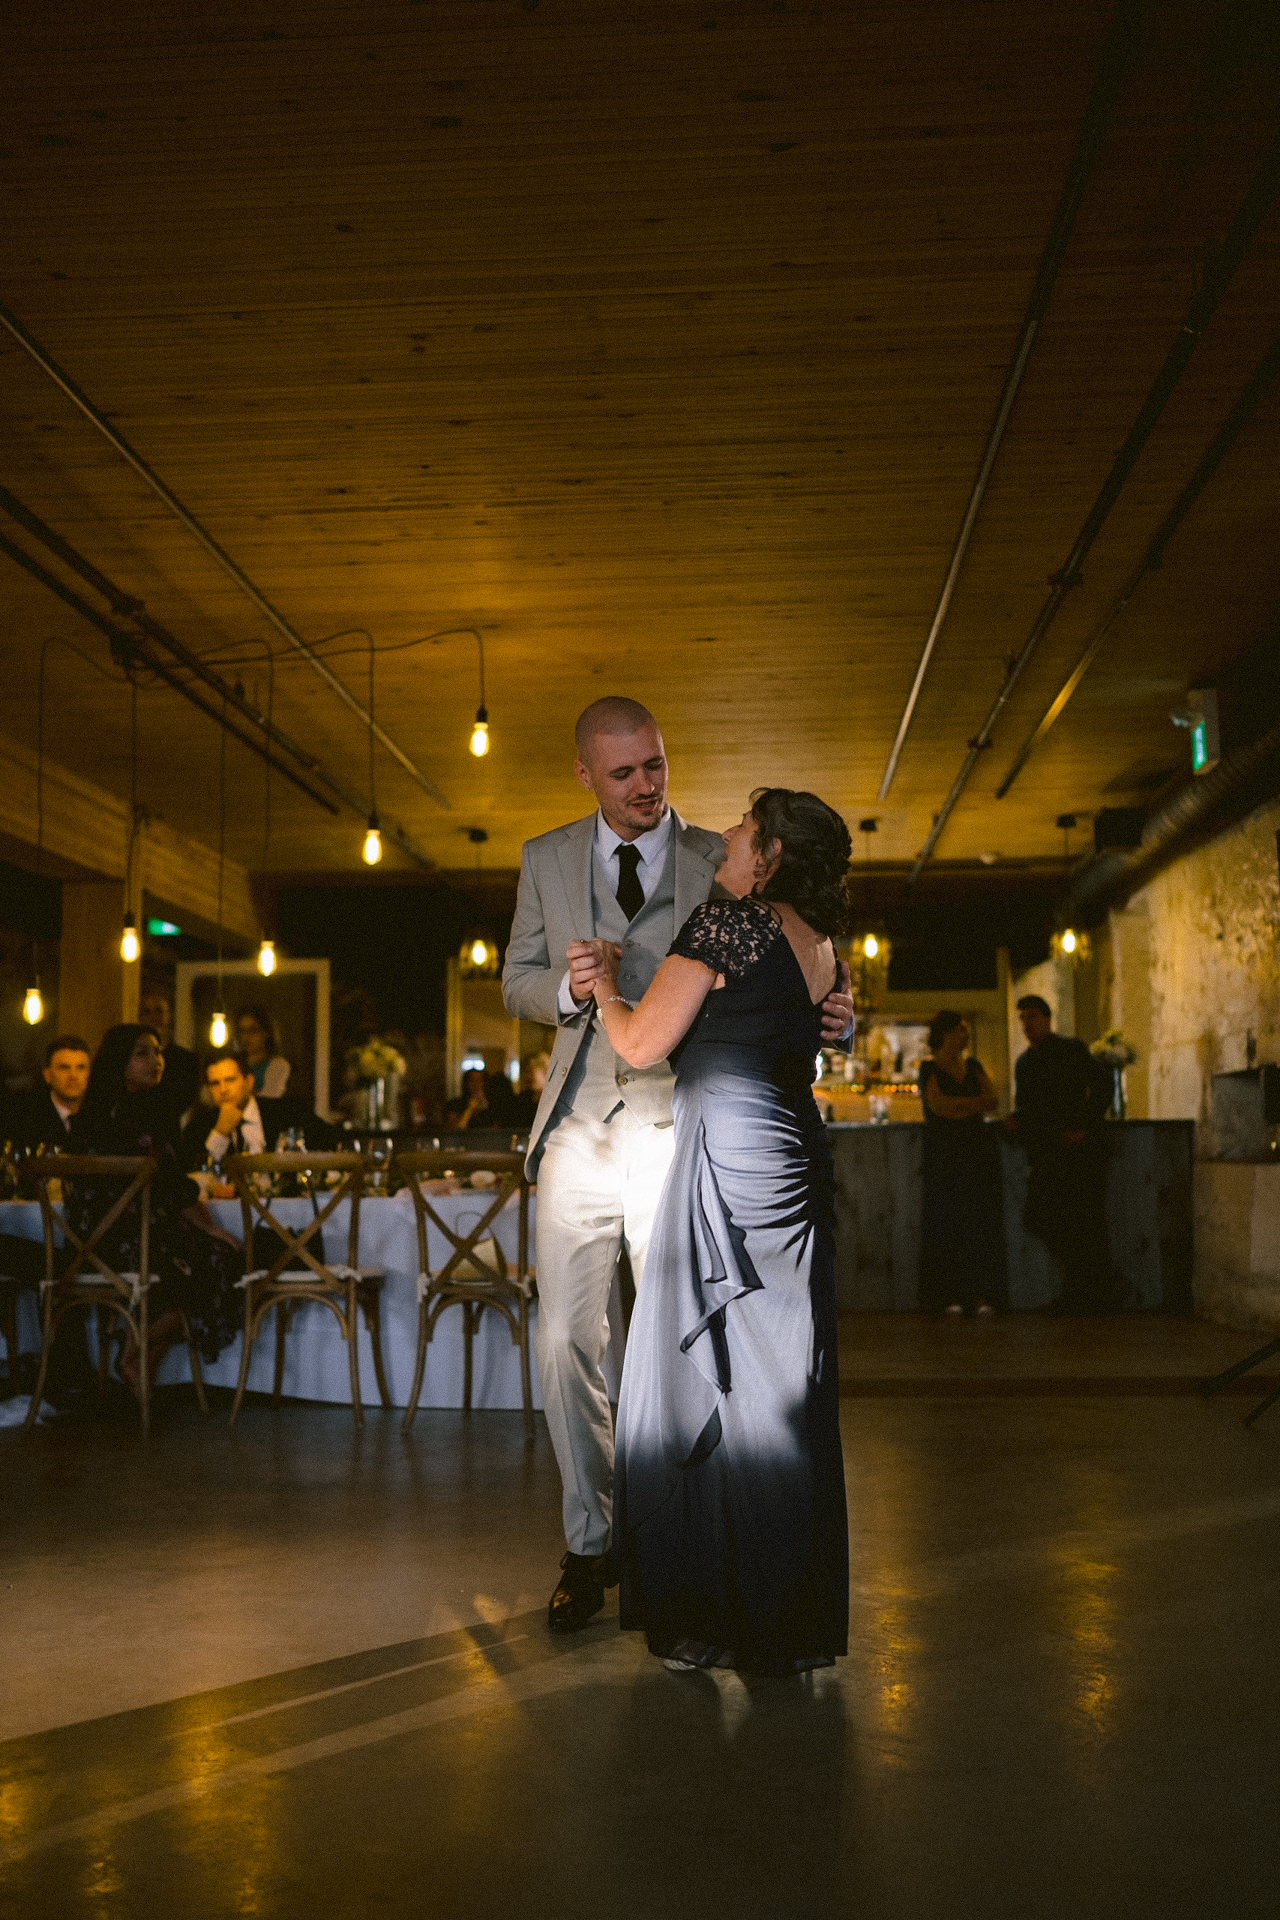 Groom holds his mother and performed a romantic parent dance.